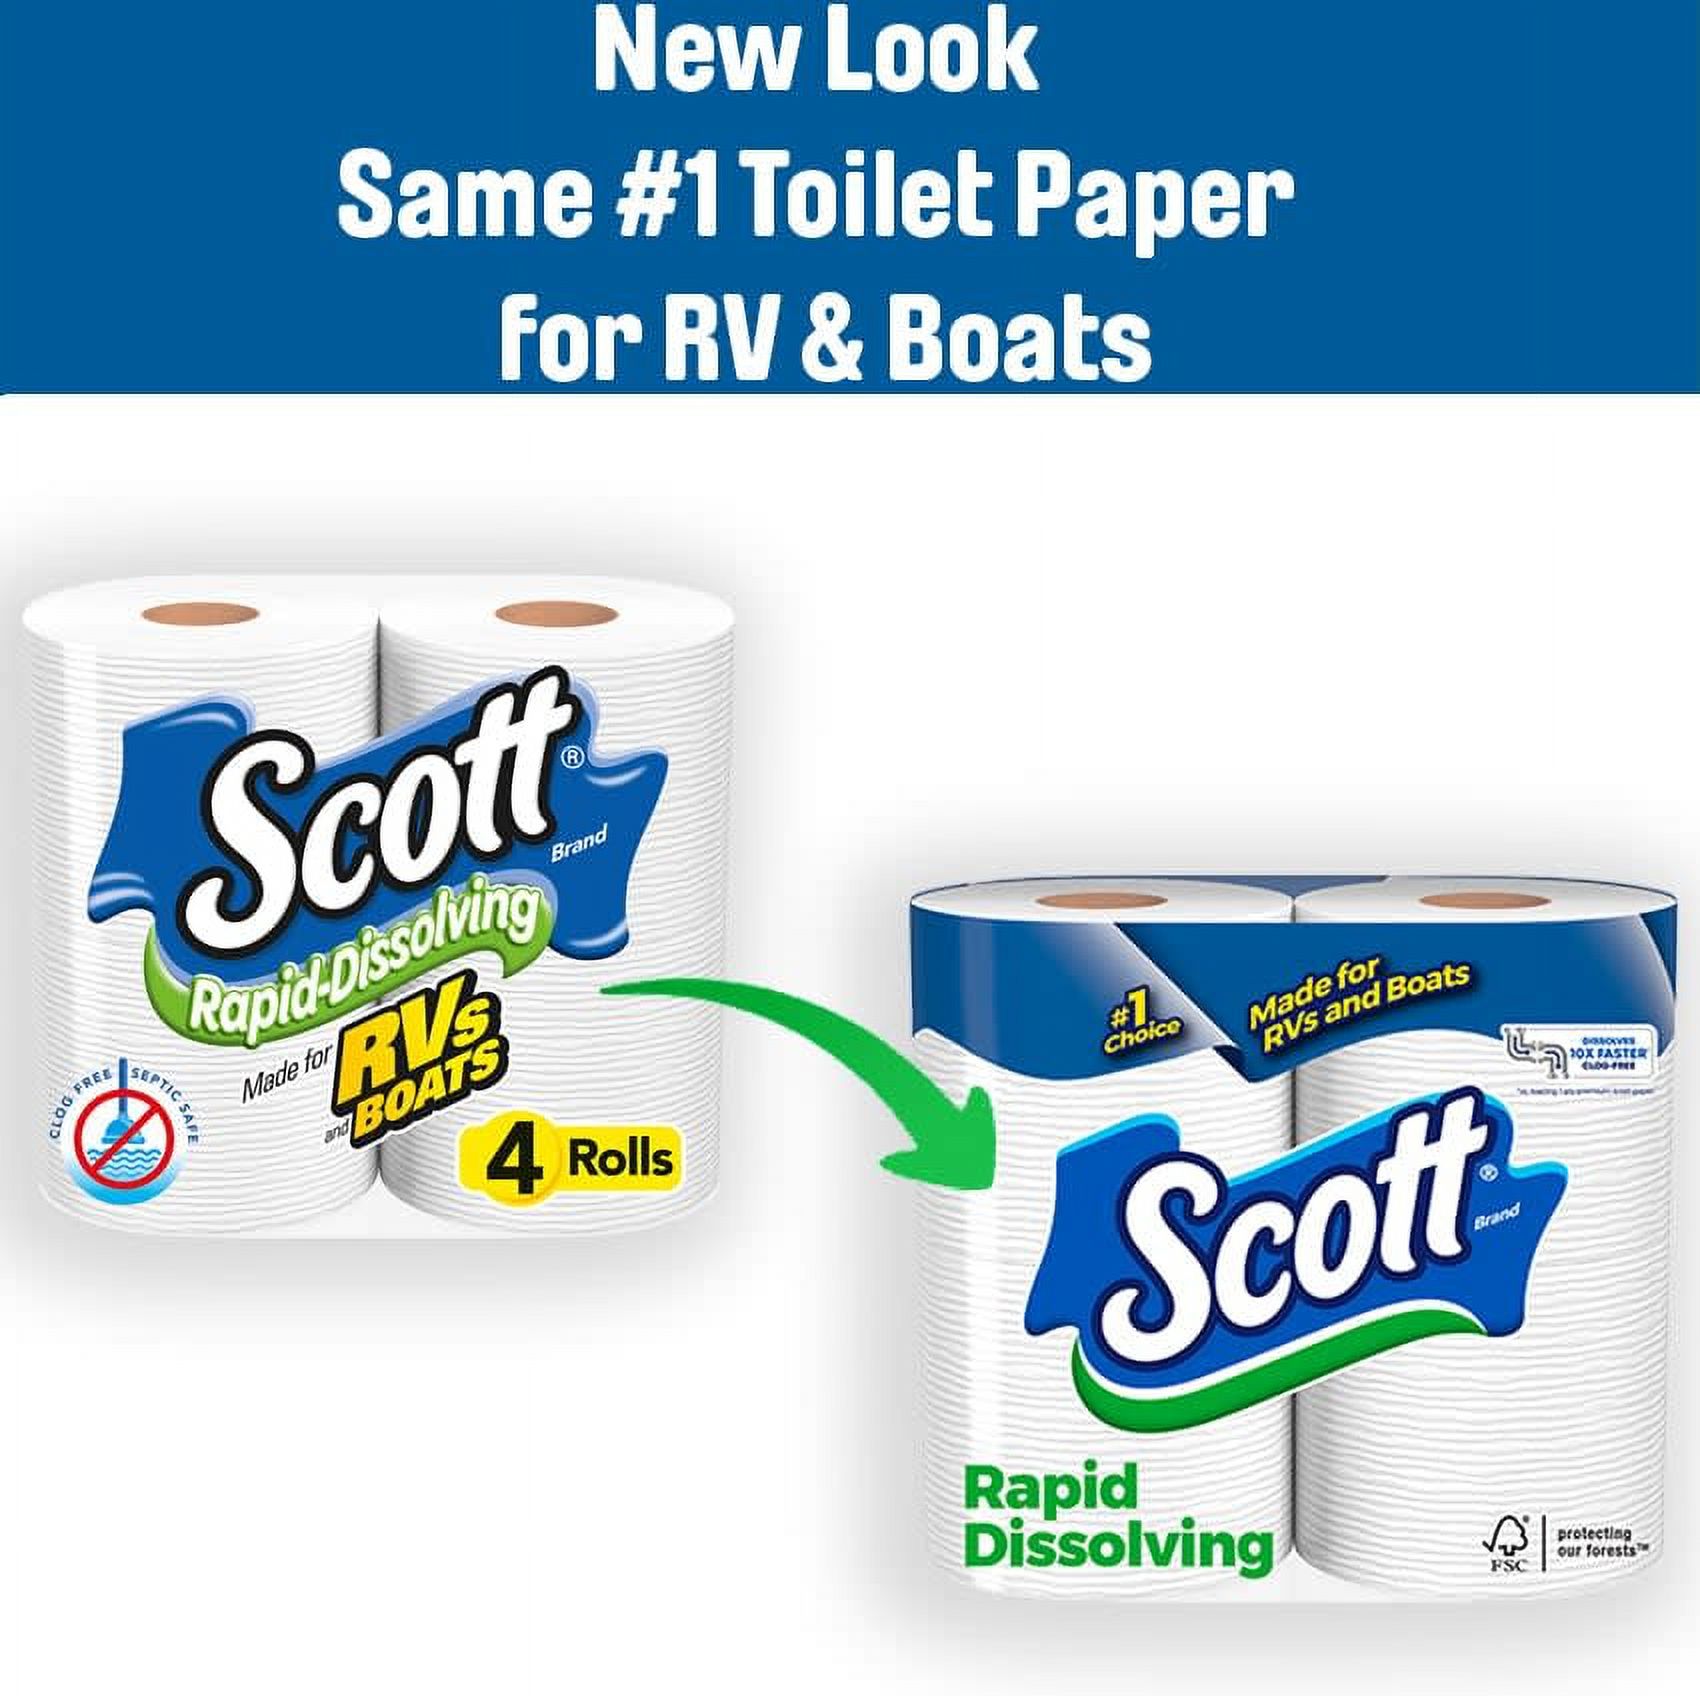 Scott Rapid-Dissolving Toilet Paper for RVs & Boats, 4 Double Rolls - image 4 of 11